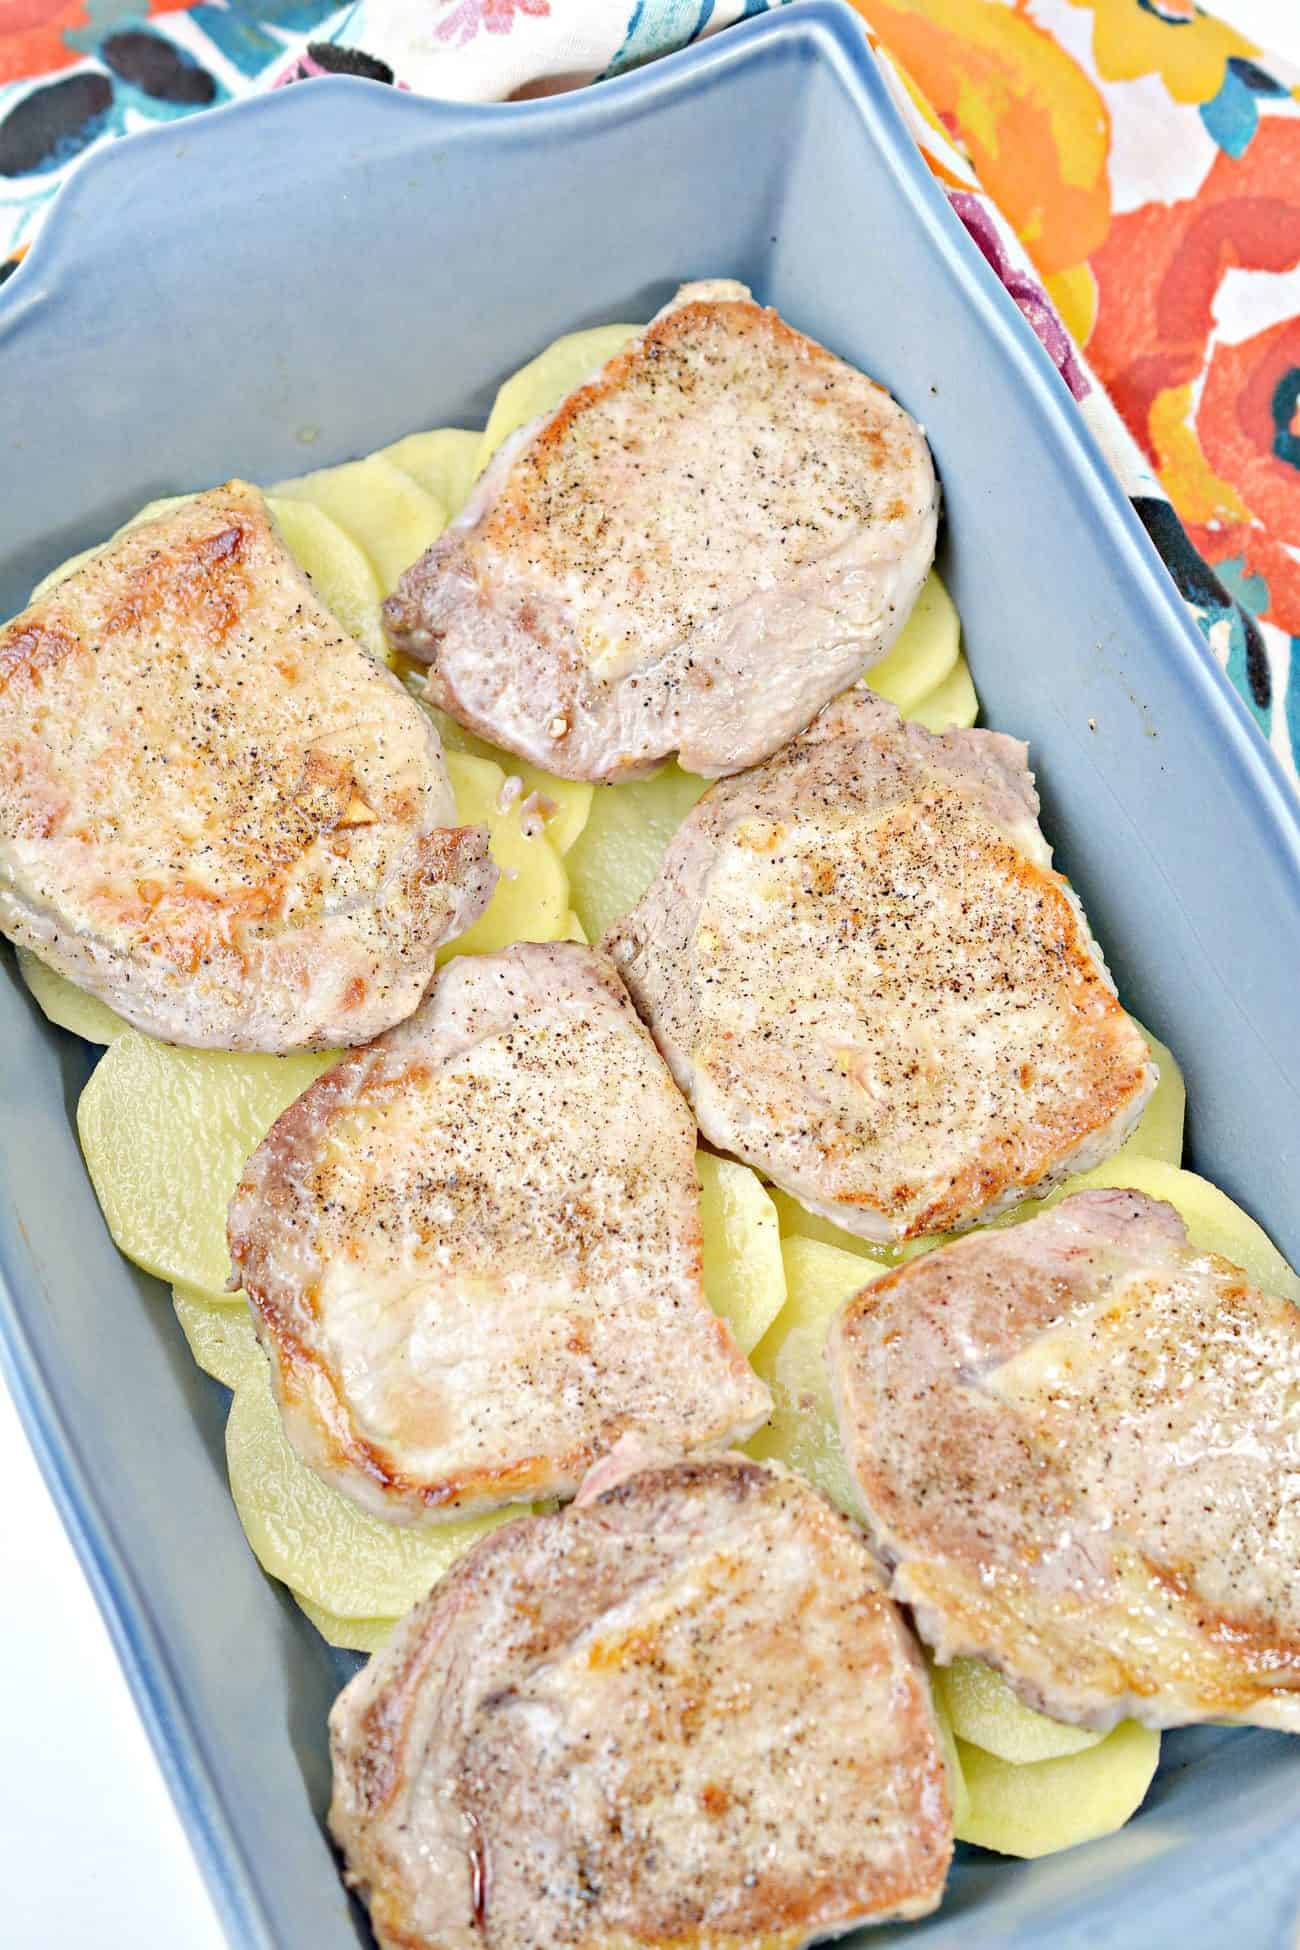 Baked Pork Chop With Lipton Onion Soup - How To Make Juicy Tender And Delicious Baked Pork Chops